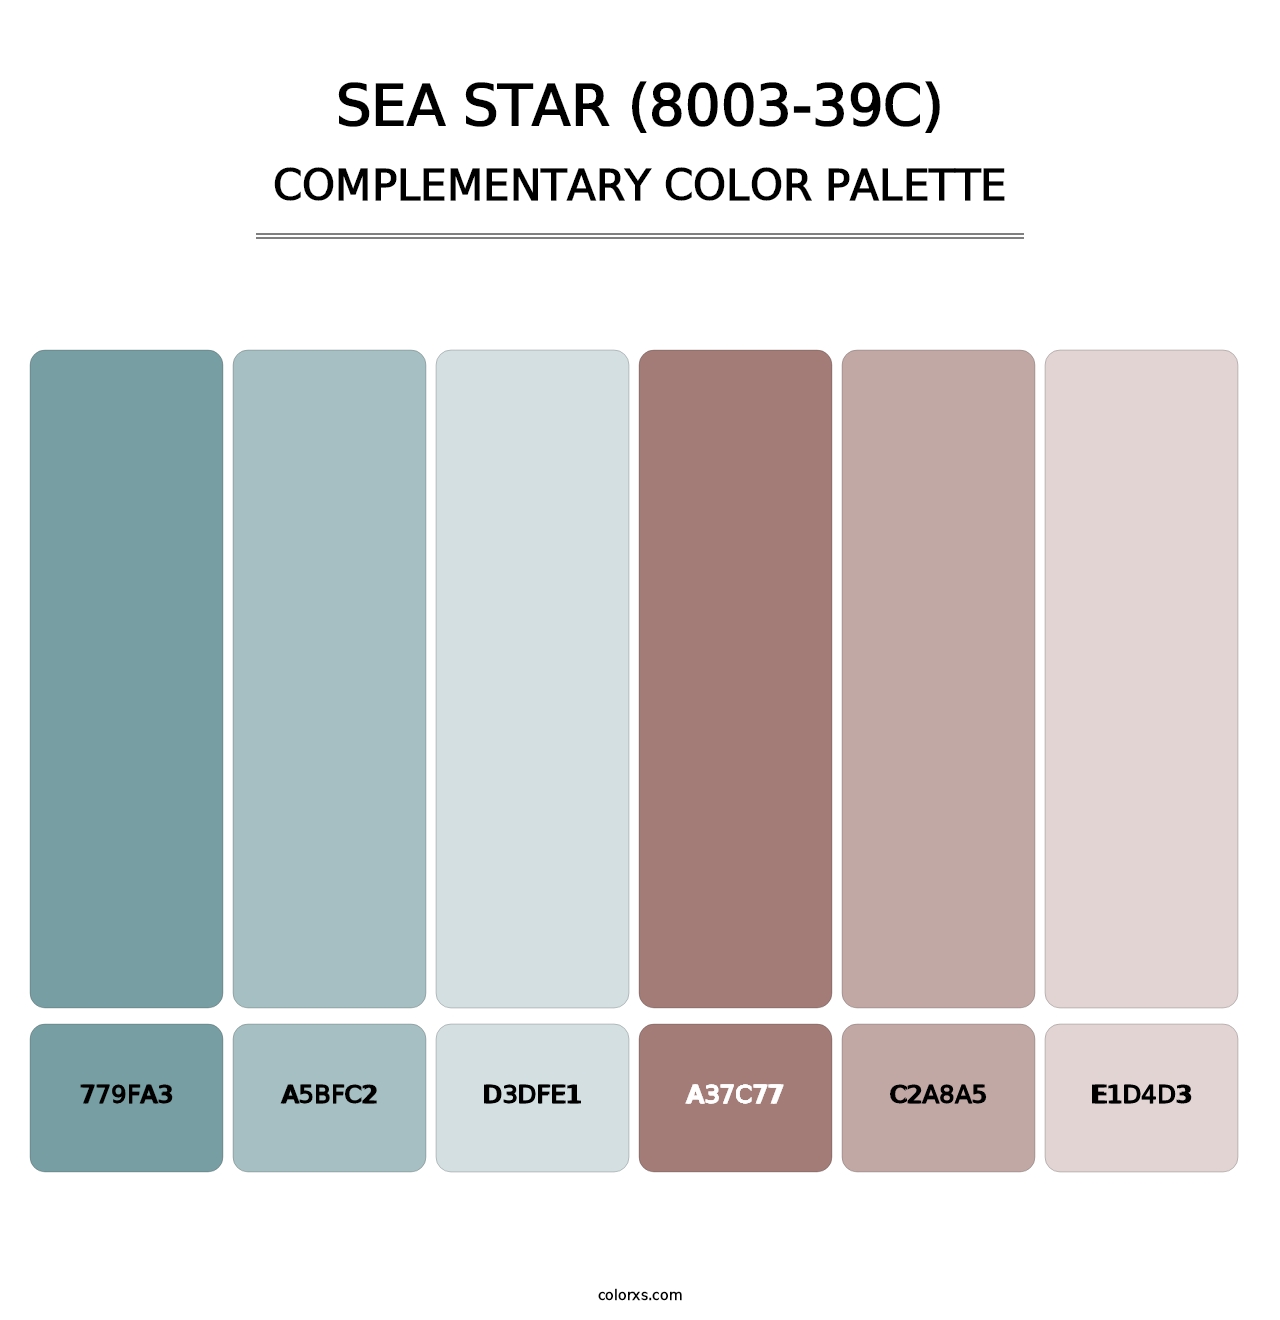 Sea Star (8003-39C) - Complementary Color Palette